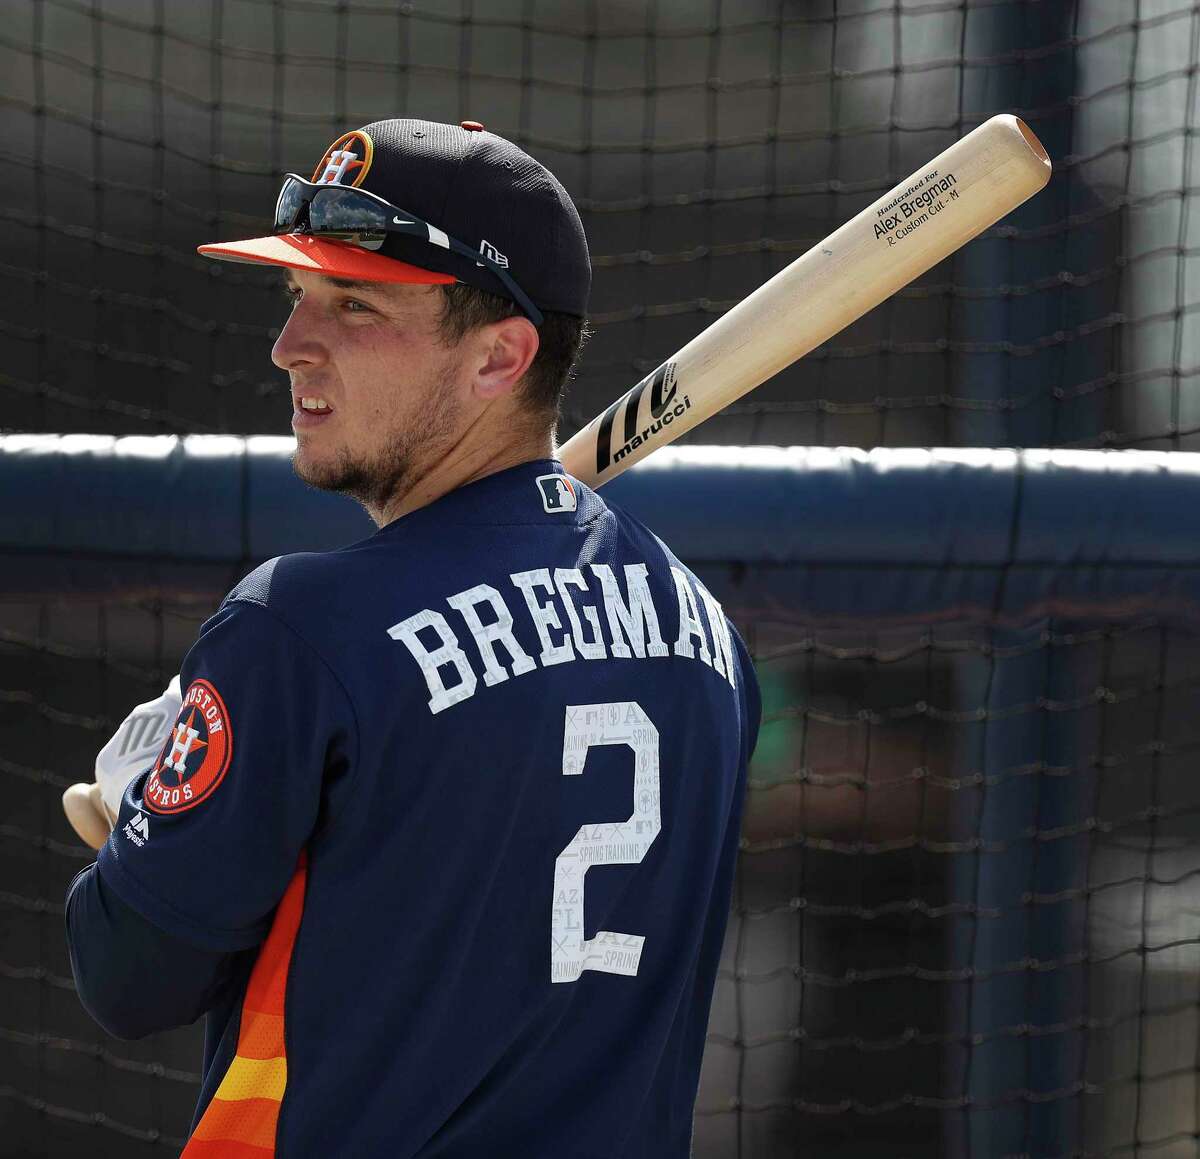 The Astros' Alex Bregman opted for Team USA over Team Israel.